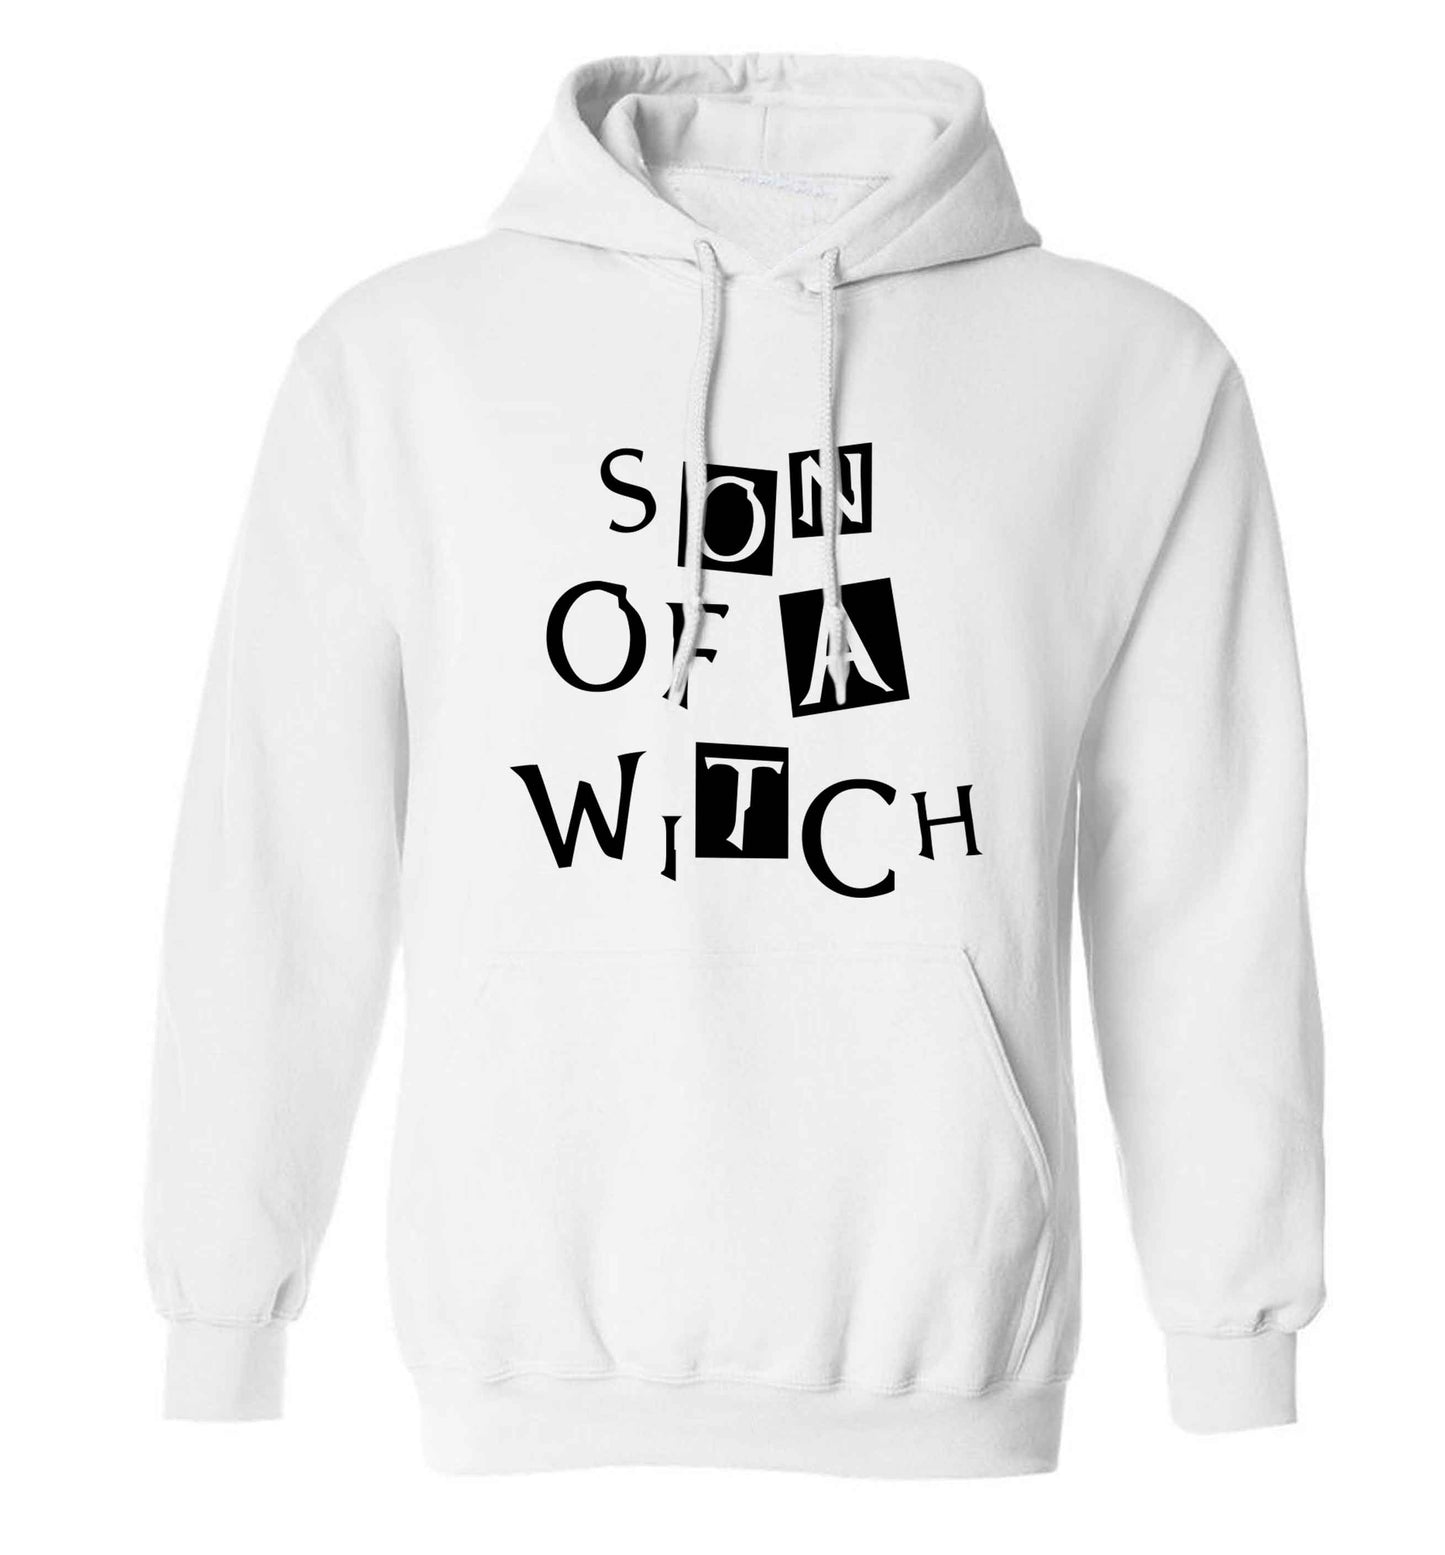 Son of a witch adults unisex white hoodie 2XL